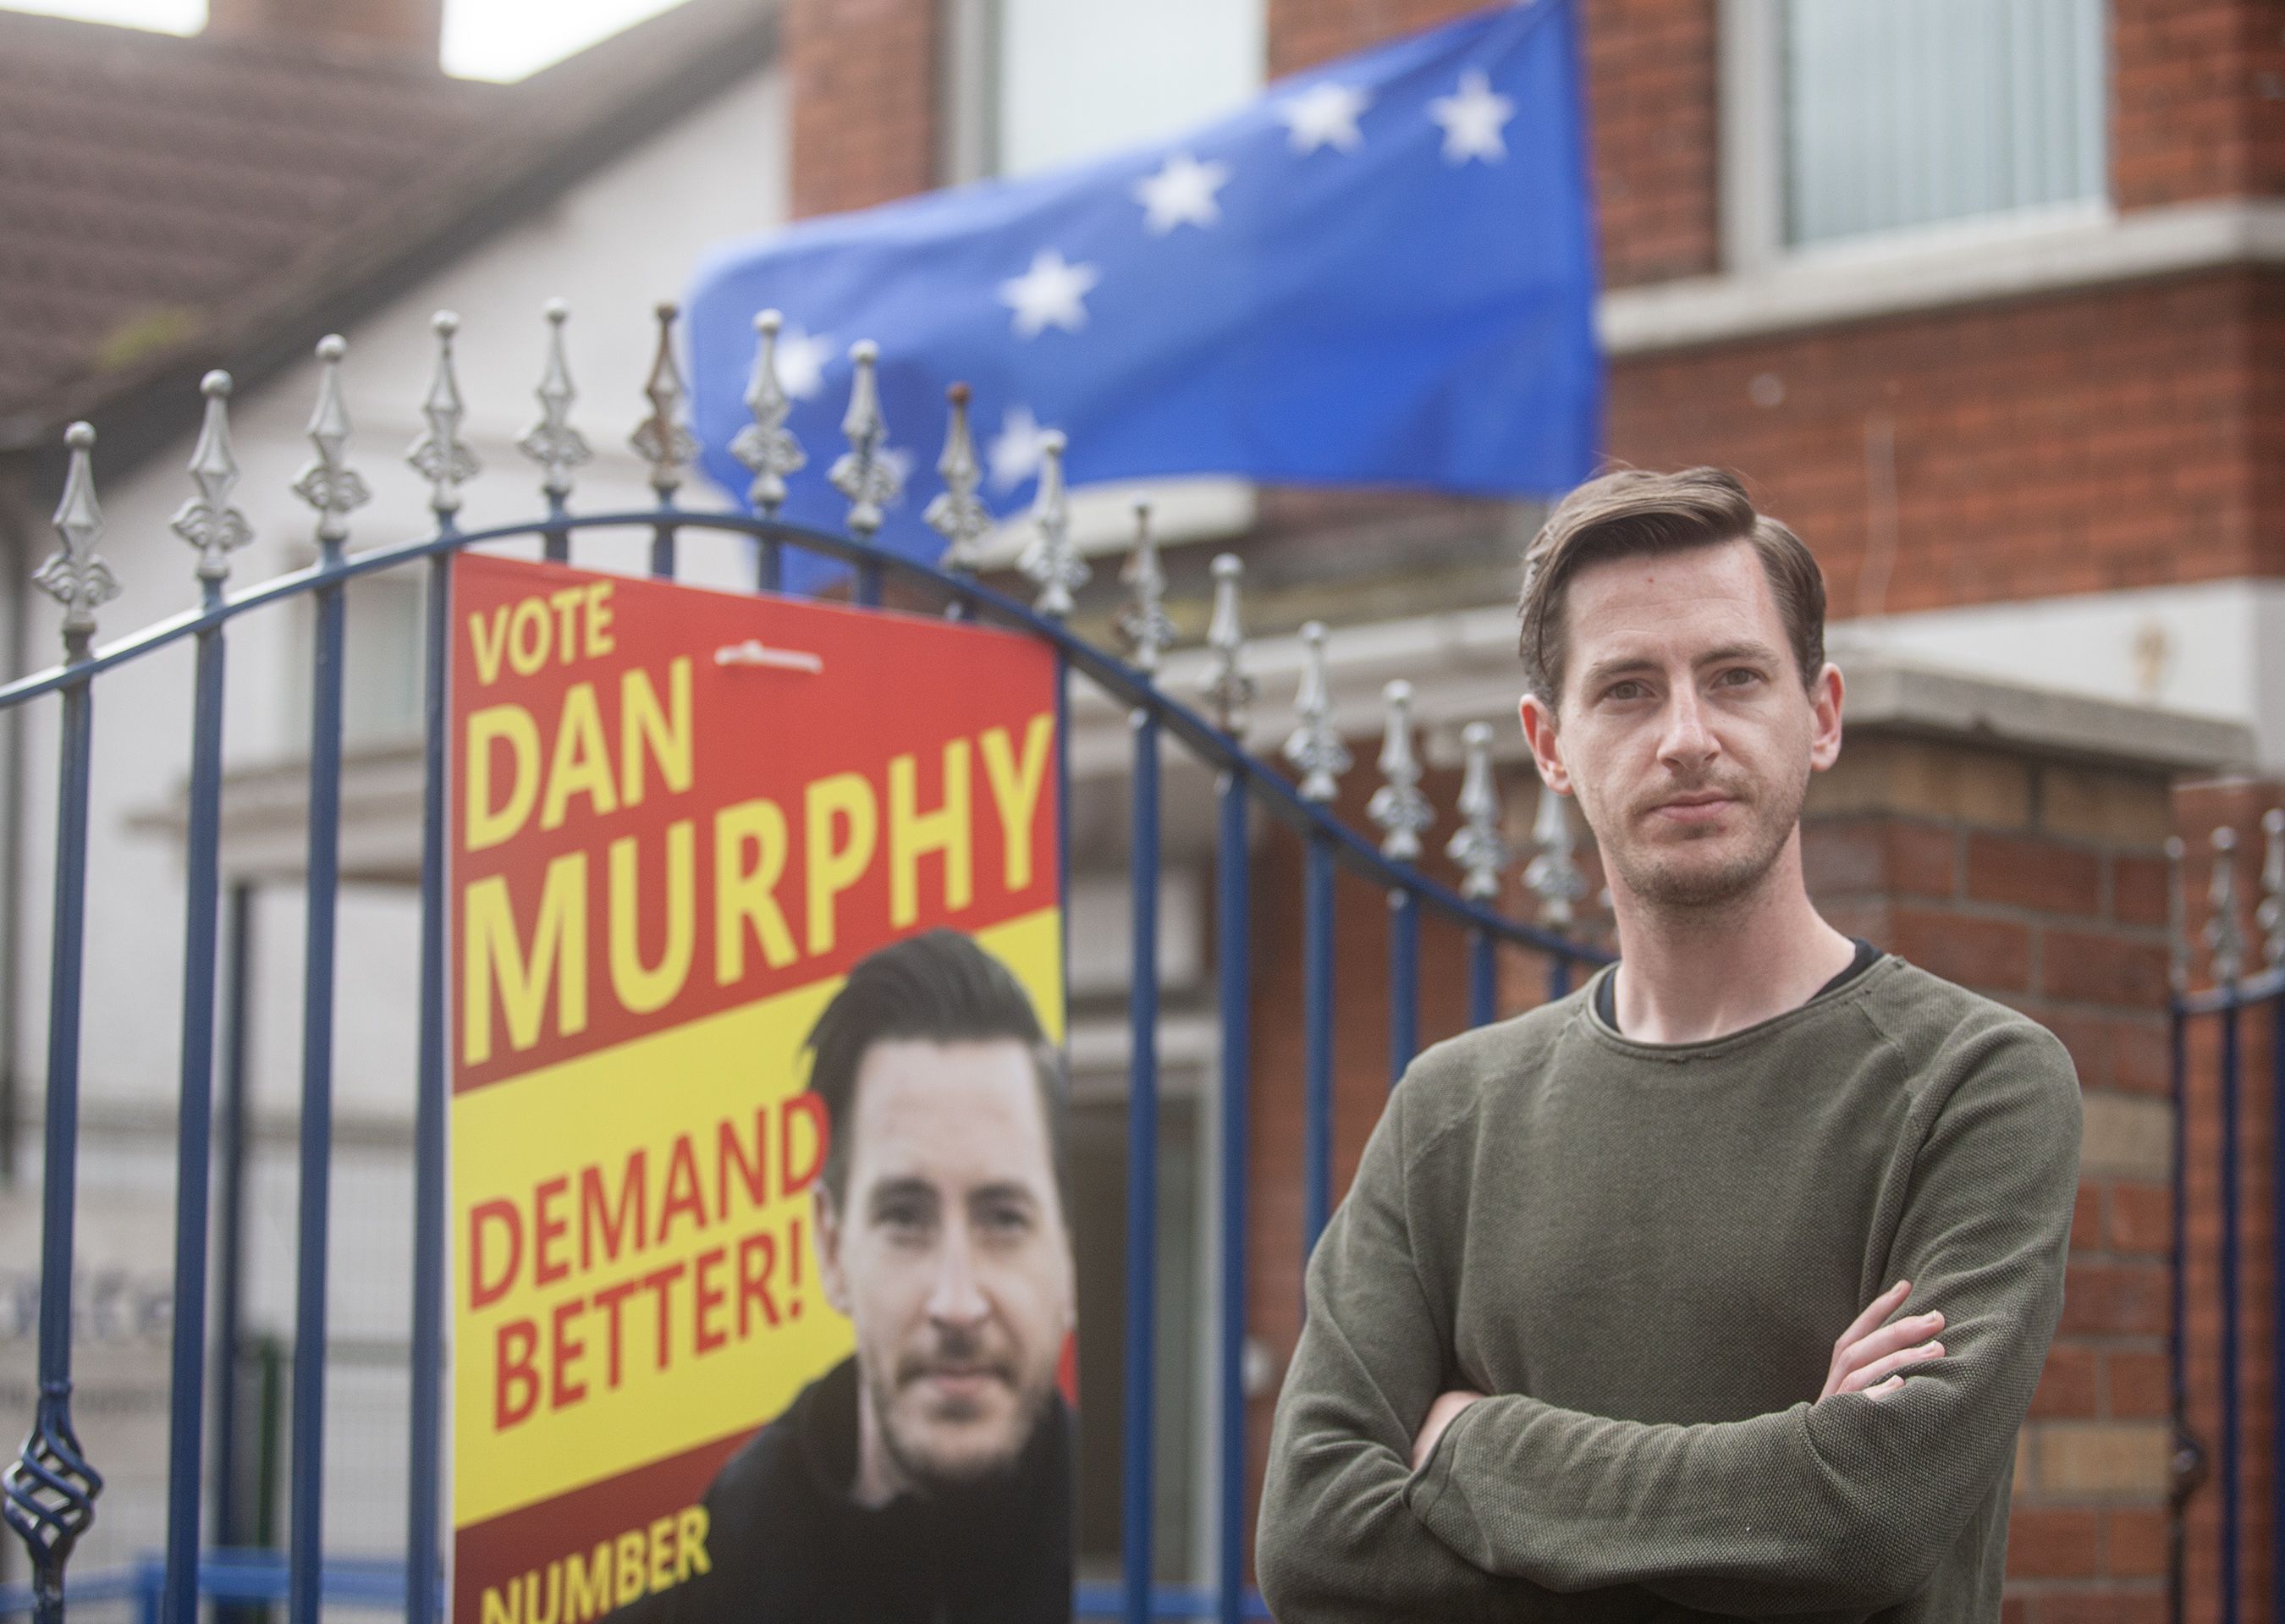 IN THE CONTEST: Dan Murphy will be hopeful to take one of the seven seats available in the Black Mountain DEA